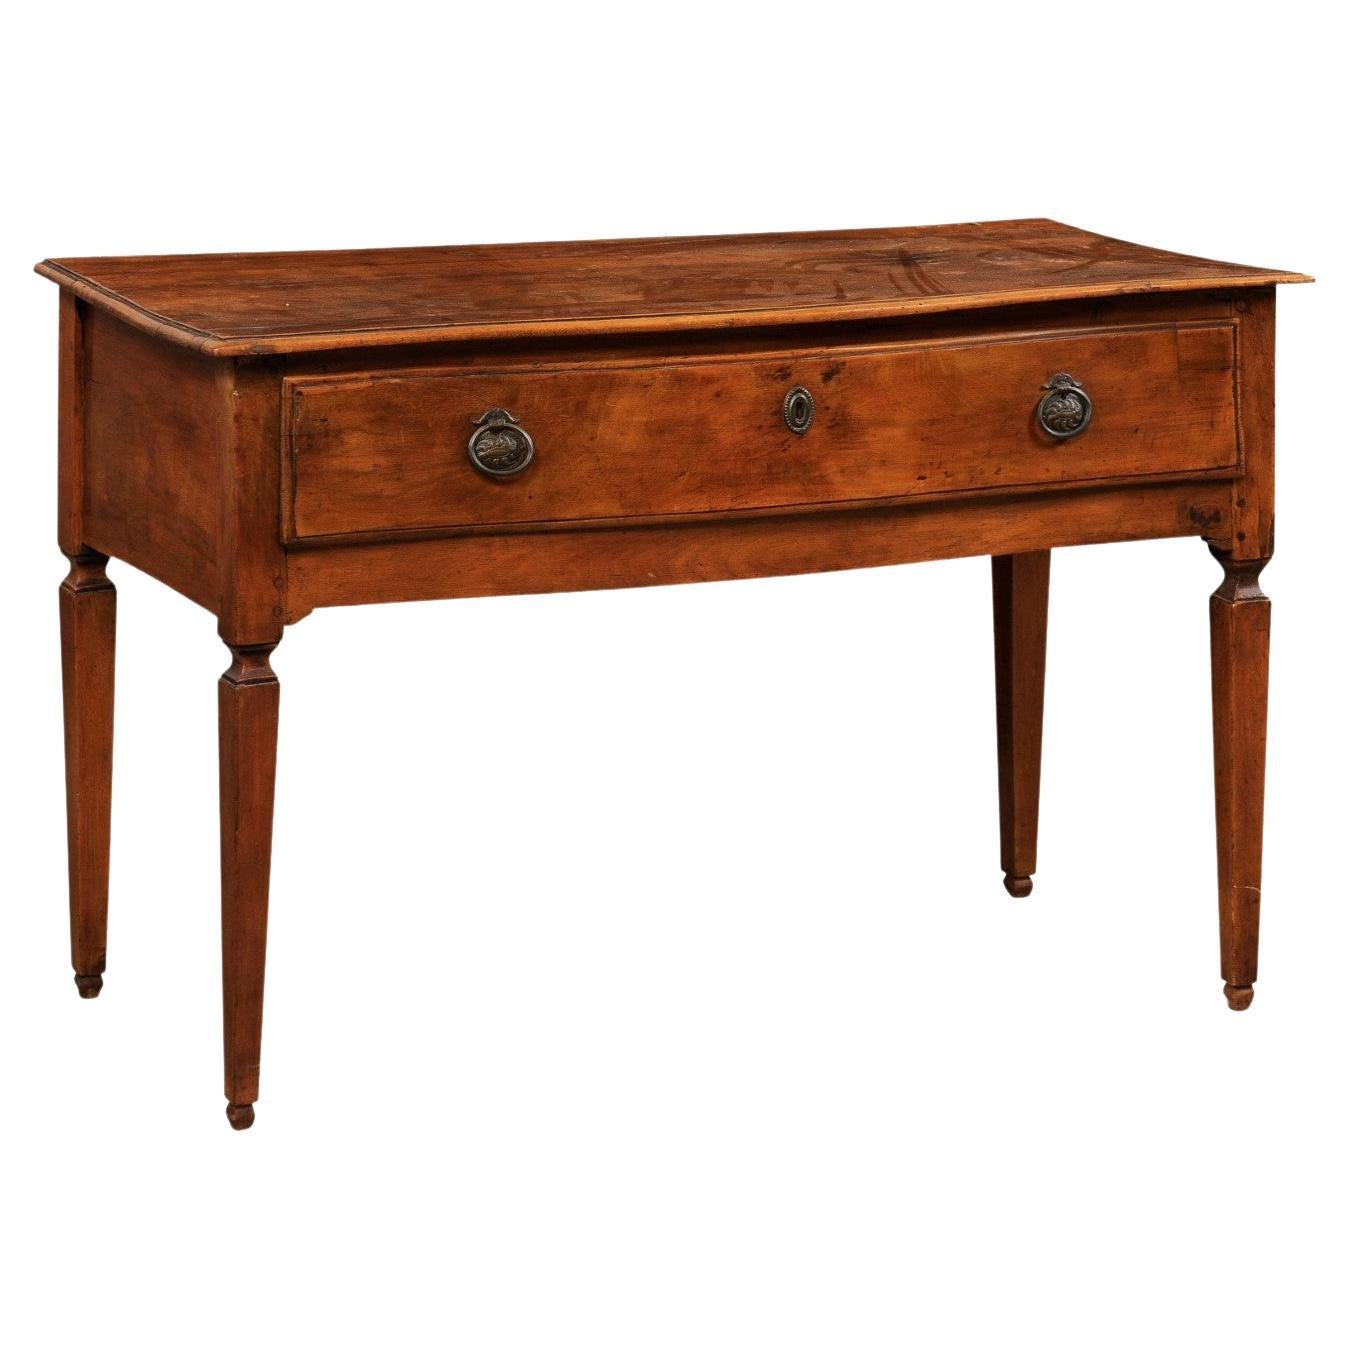 Late 18th C. Italian Walnut Server Table w/Subtle Bow Front & Long Single Drawer For Sale